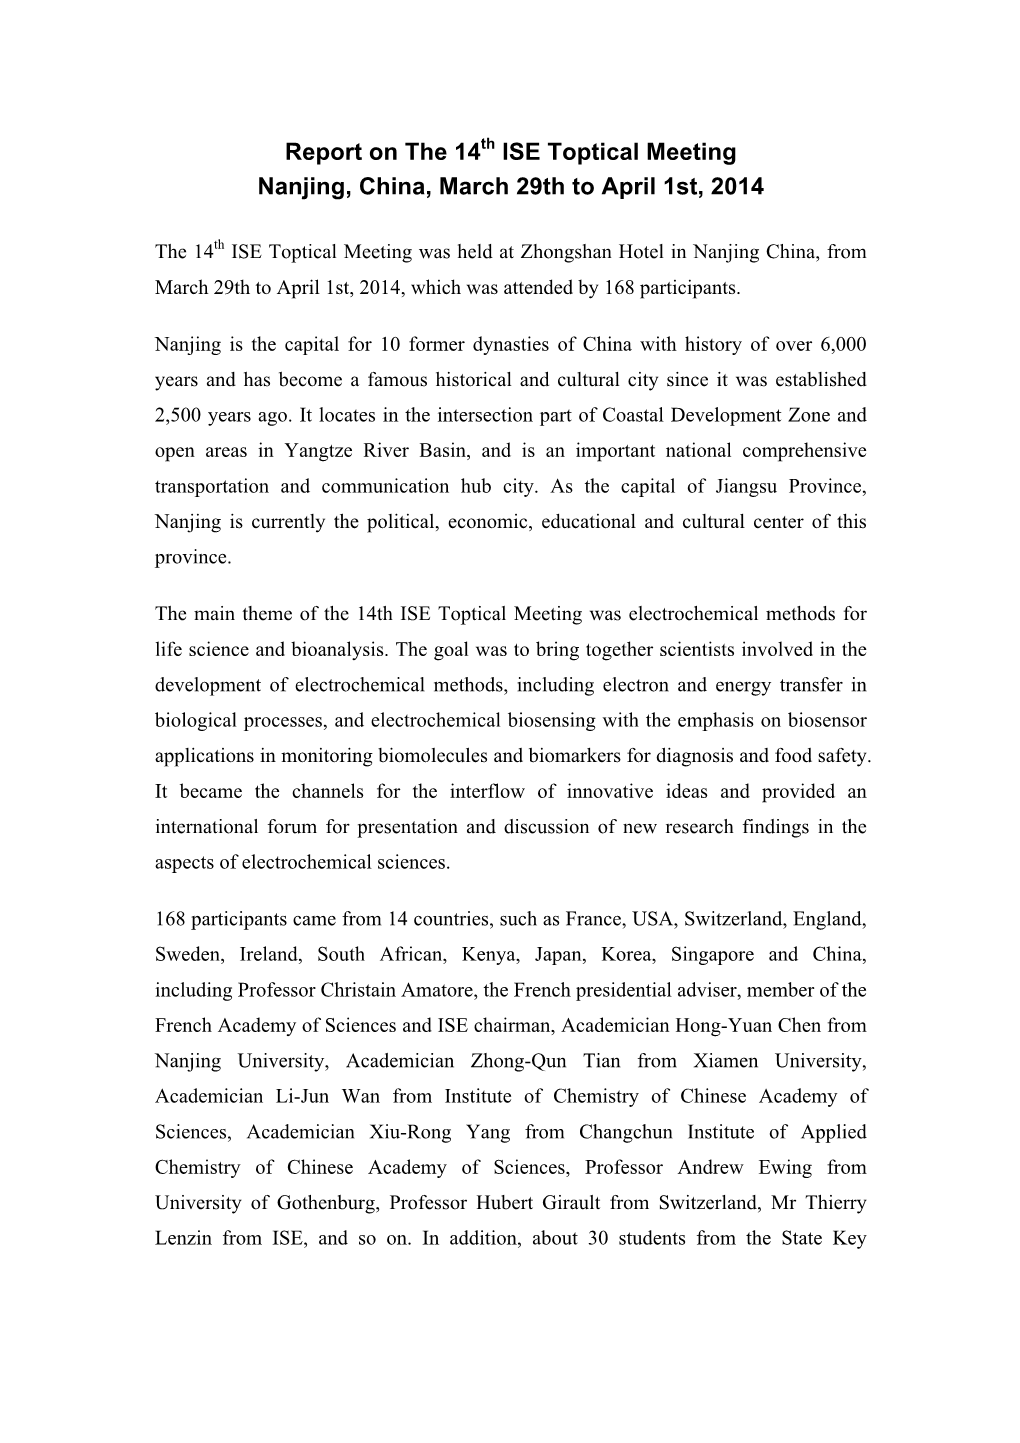 Report on the 14Th ISE Toptical Meeting Nanjing, China, March 29Th to April 1St, 2014